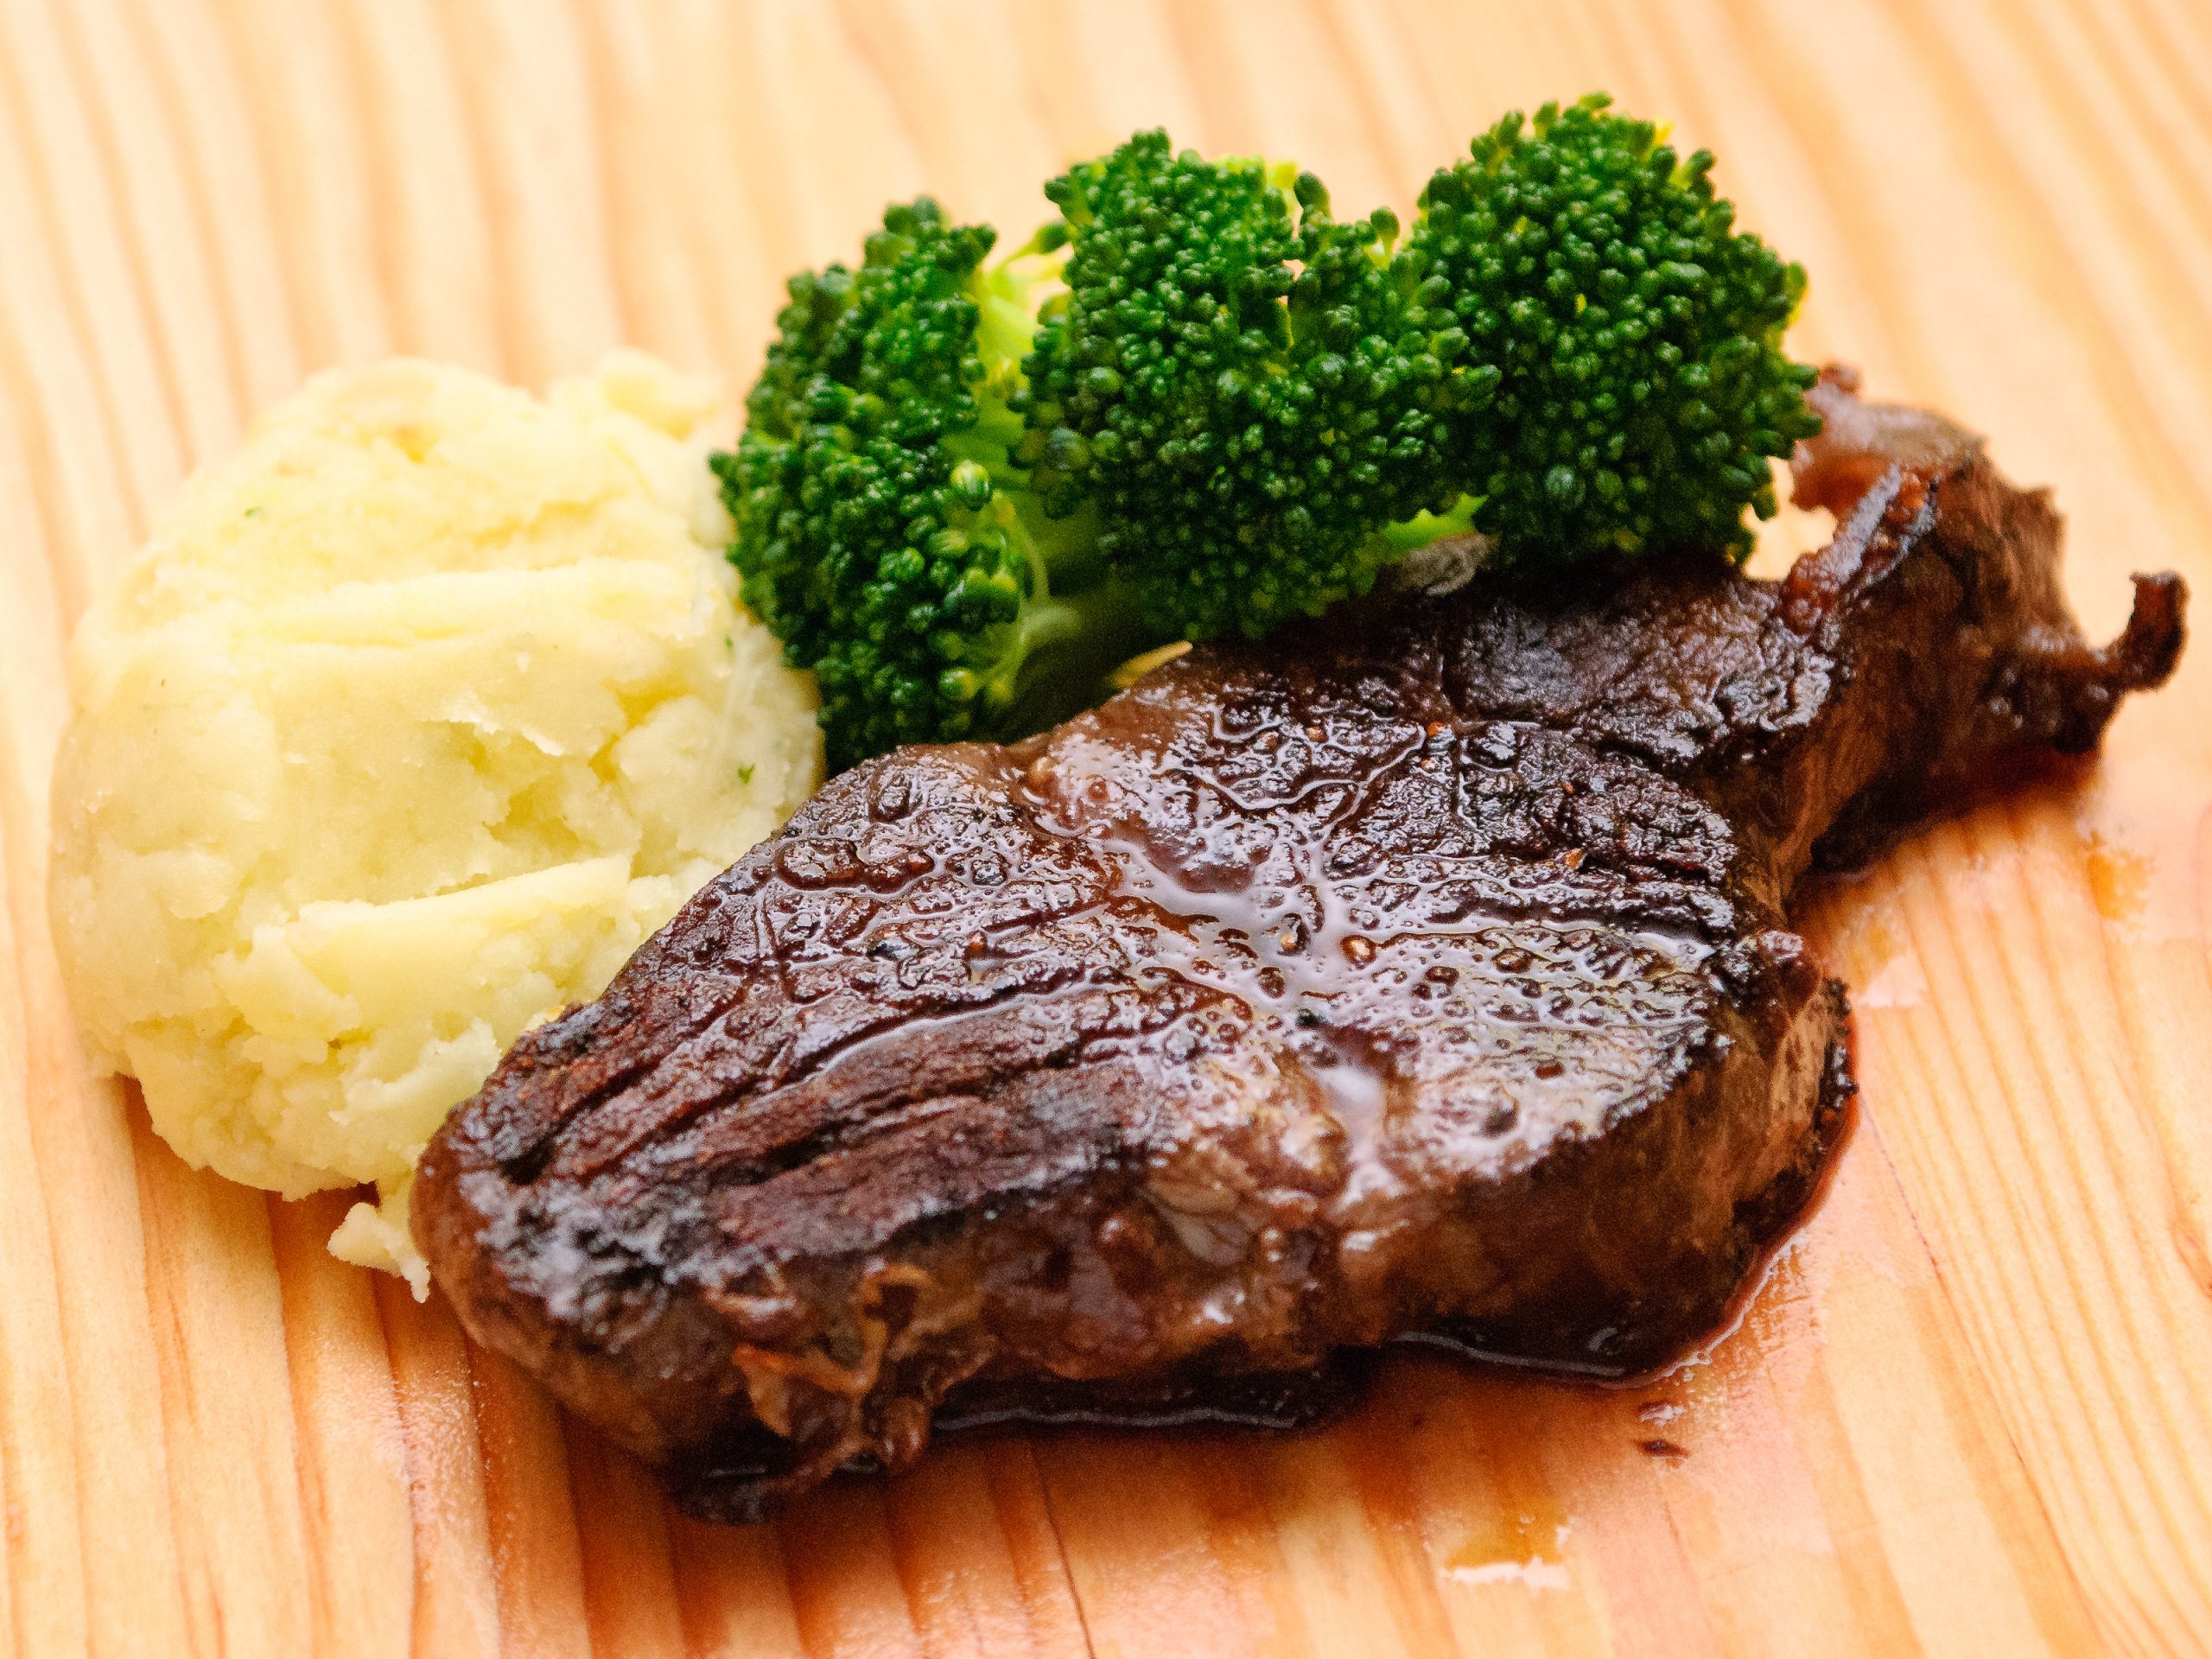 How to Make Steak and Mashed Potatoes on a Budget: 14 Steps